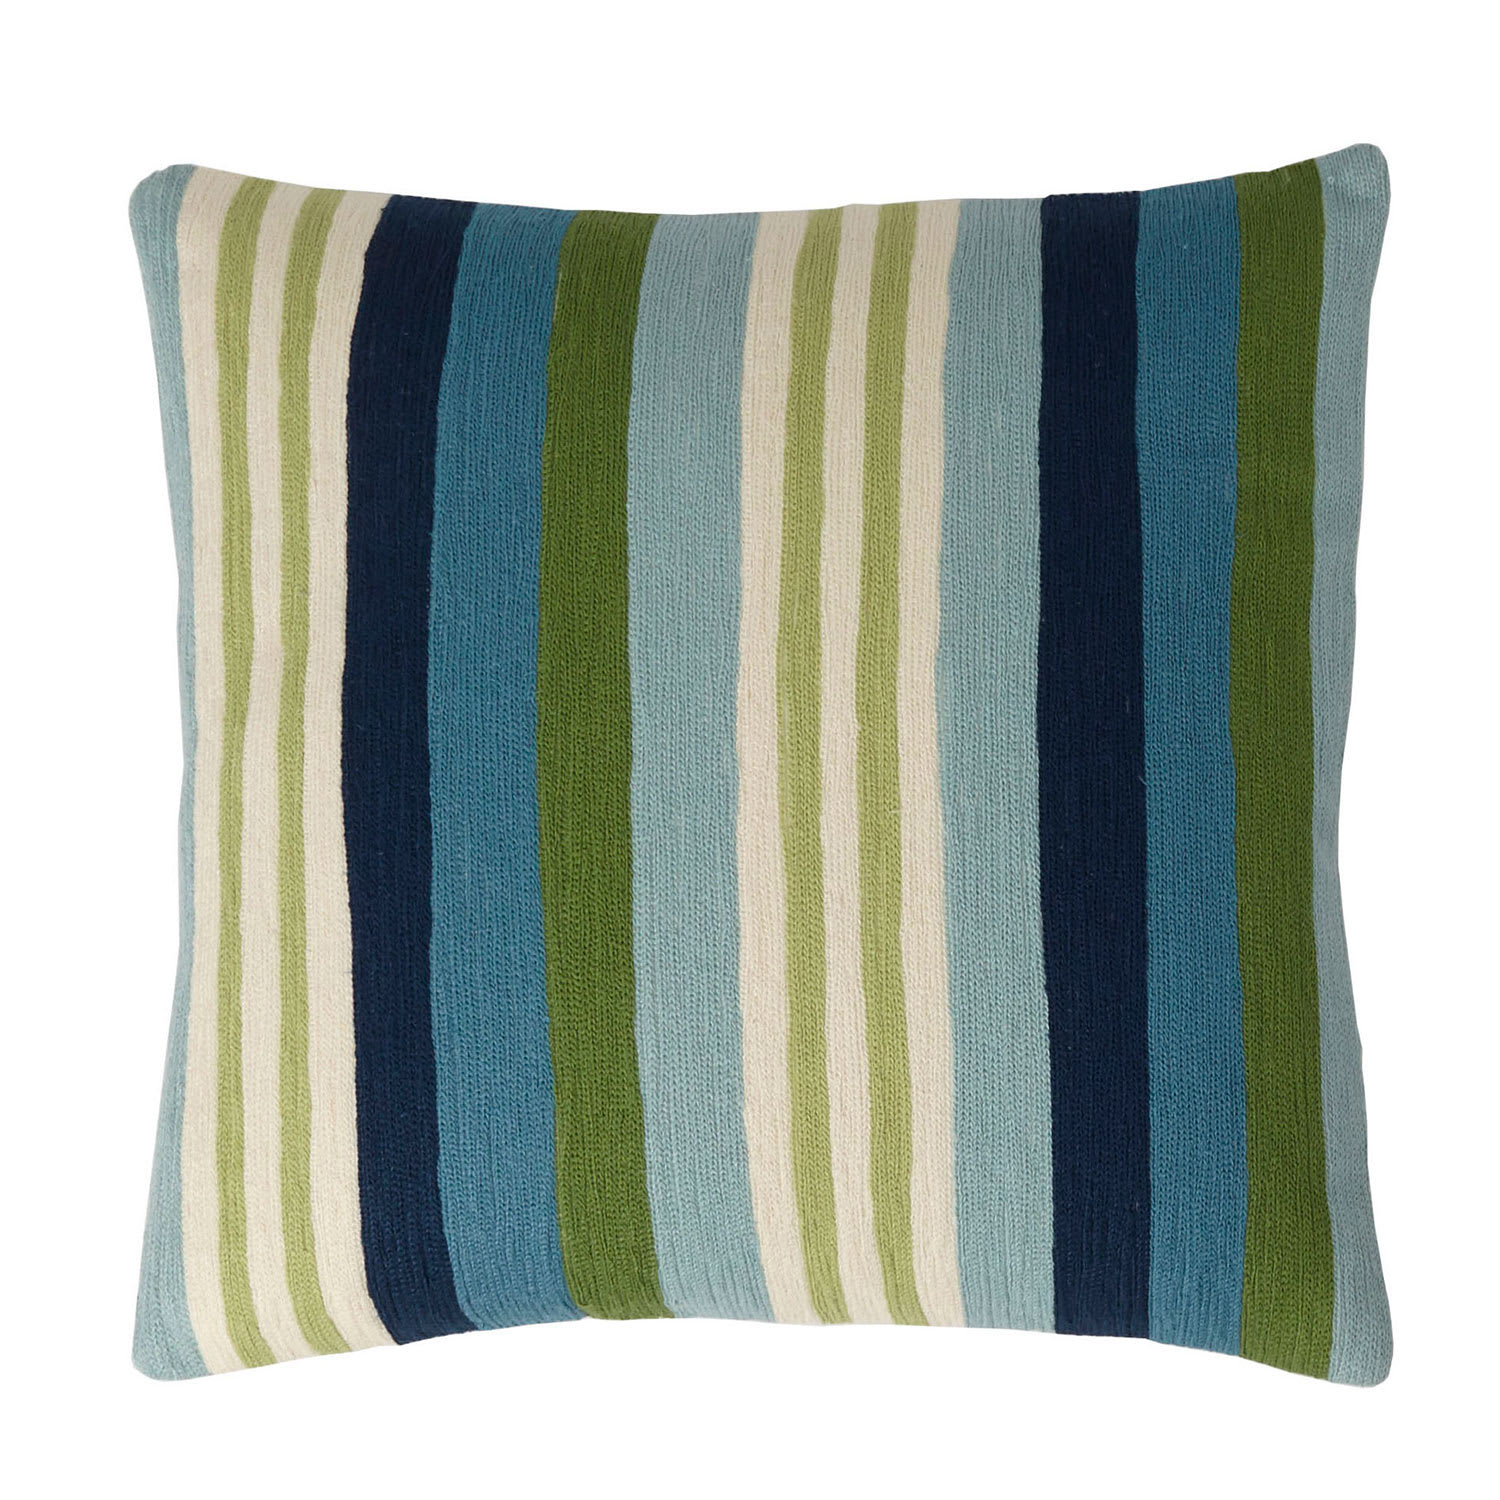 Blue Stripe Embroidered Pillow Cover - Stripe